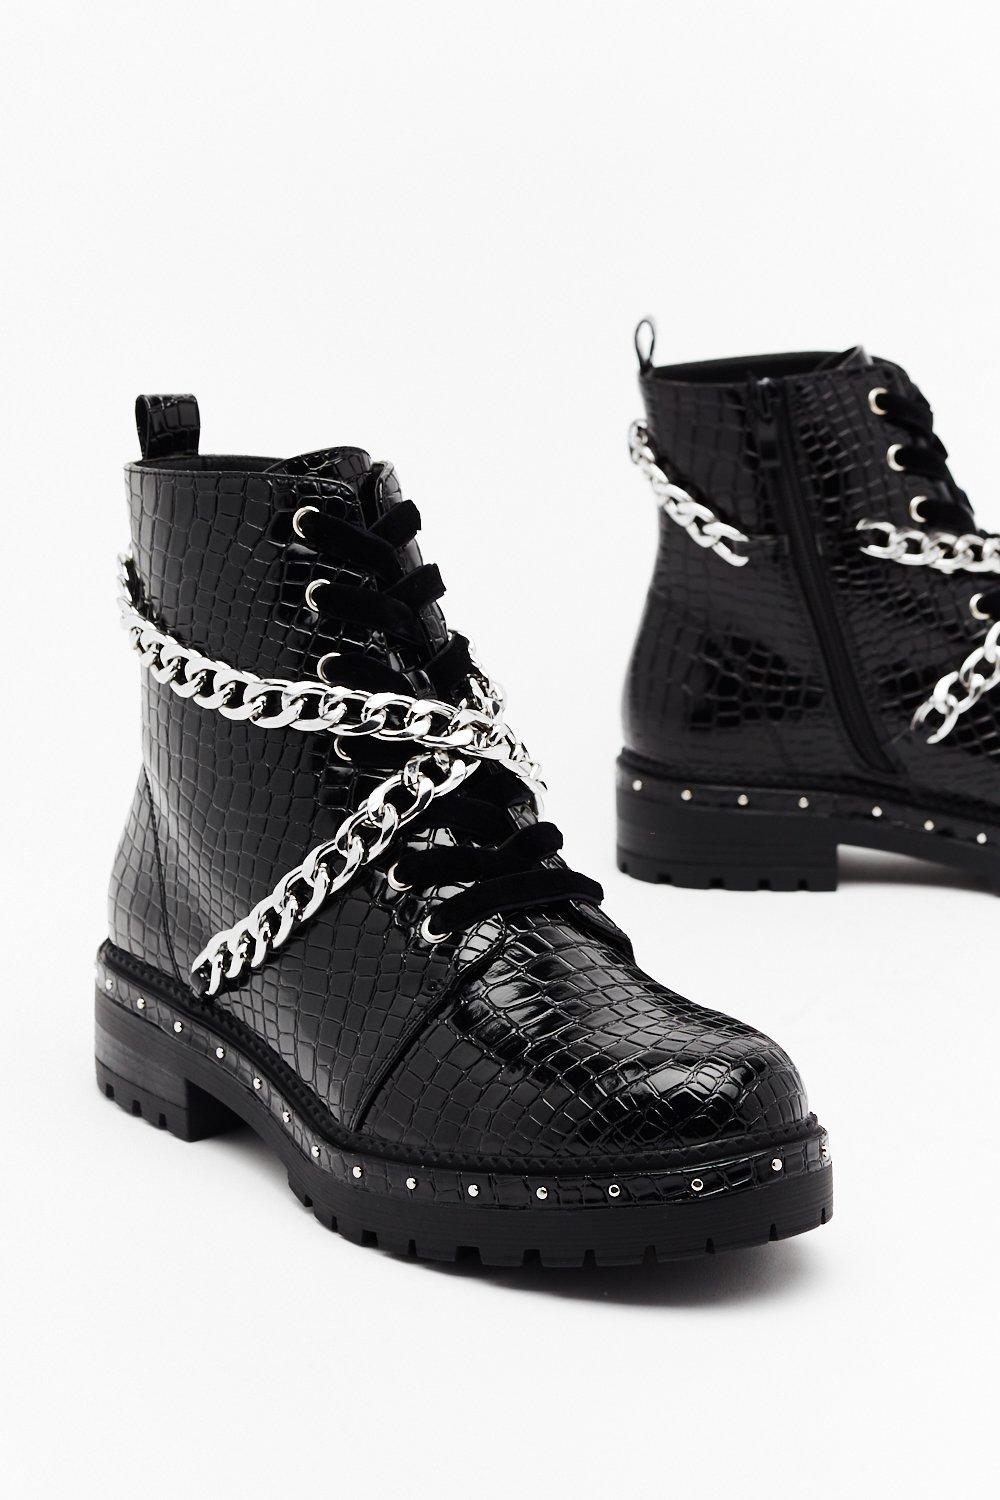 croc style boots